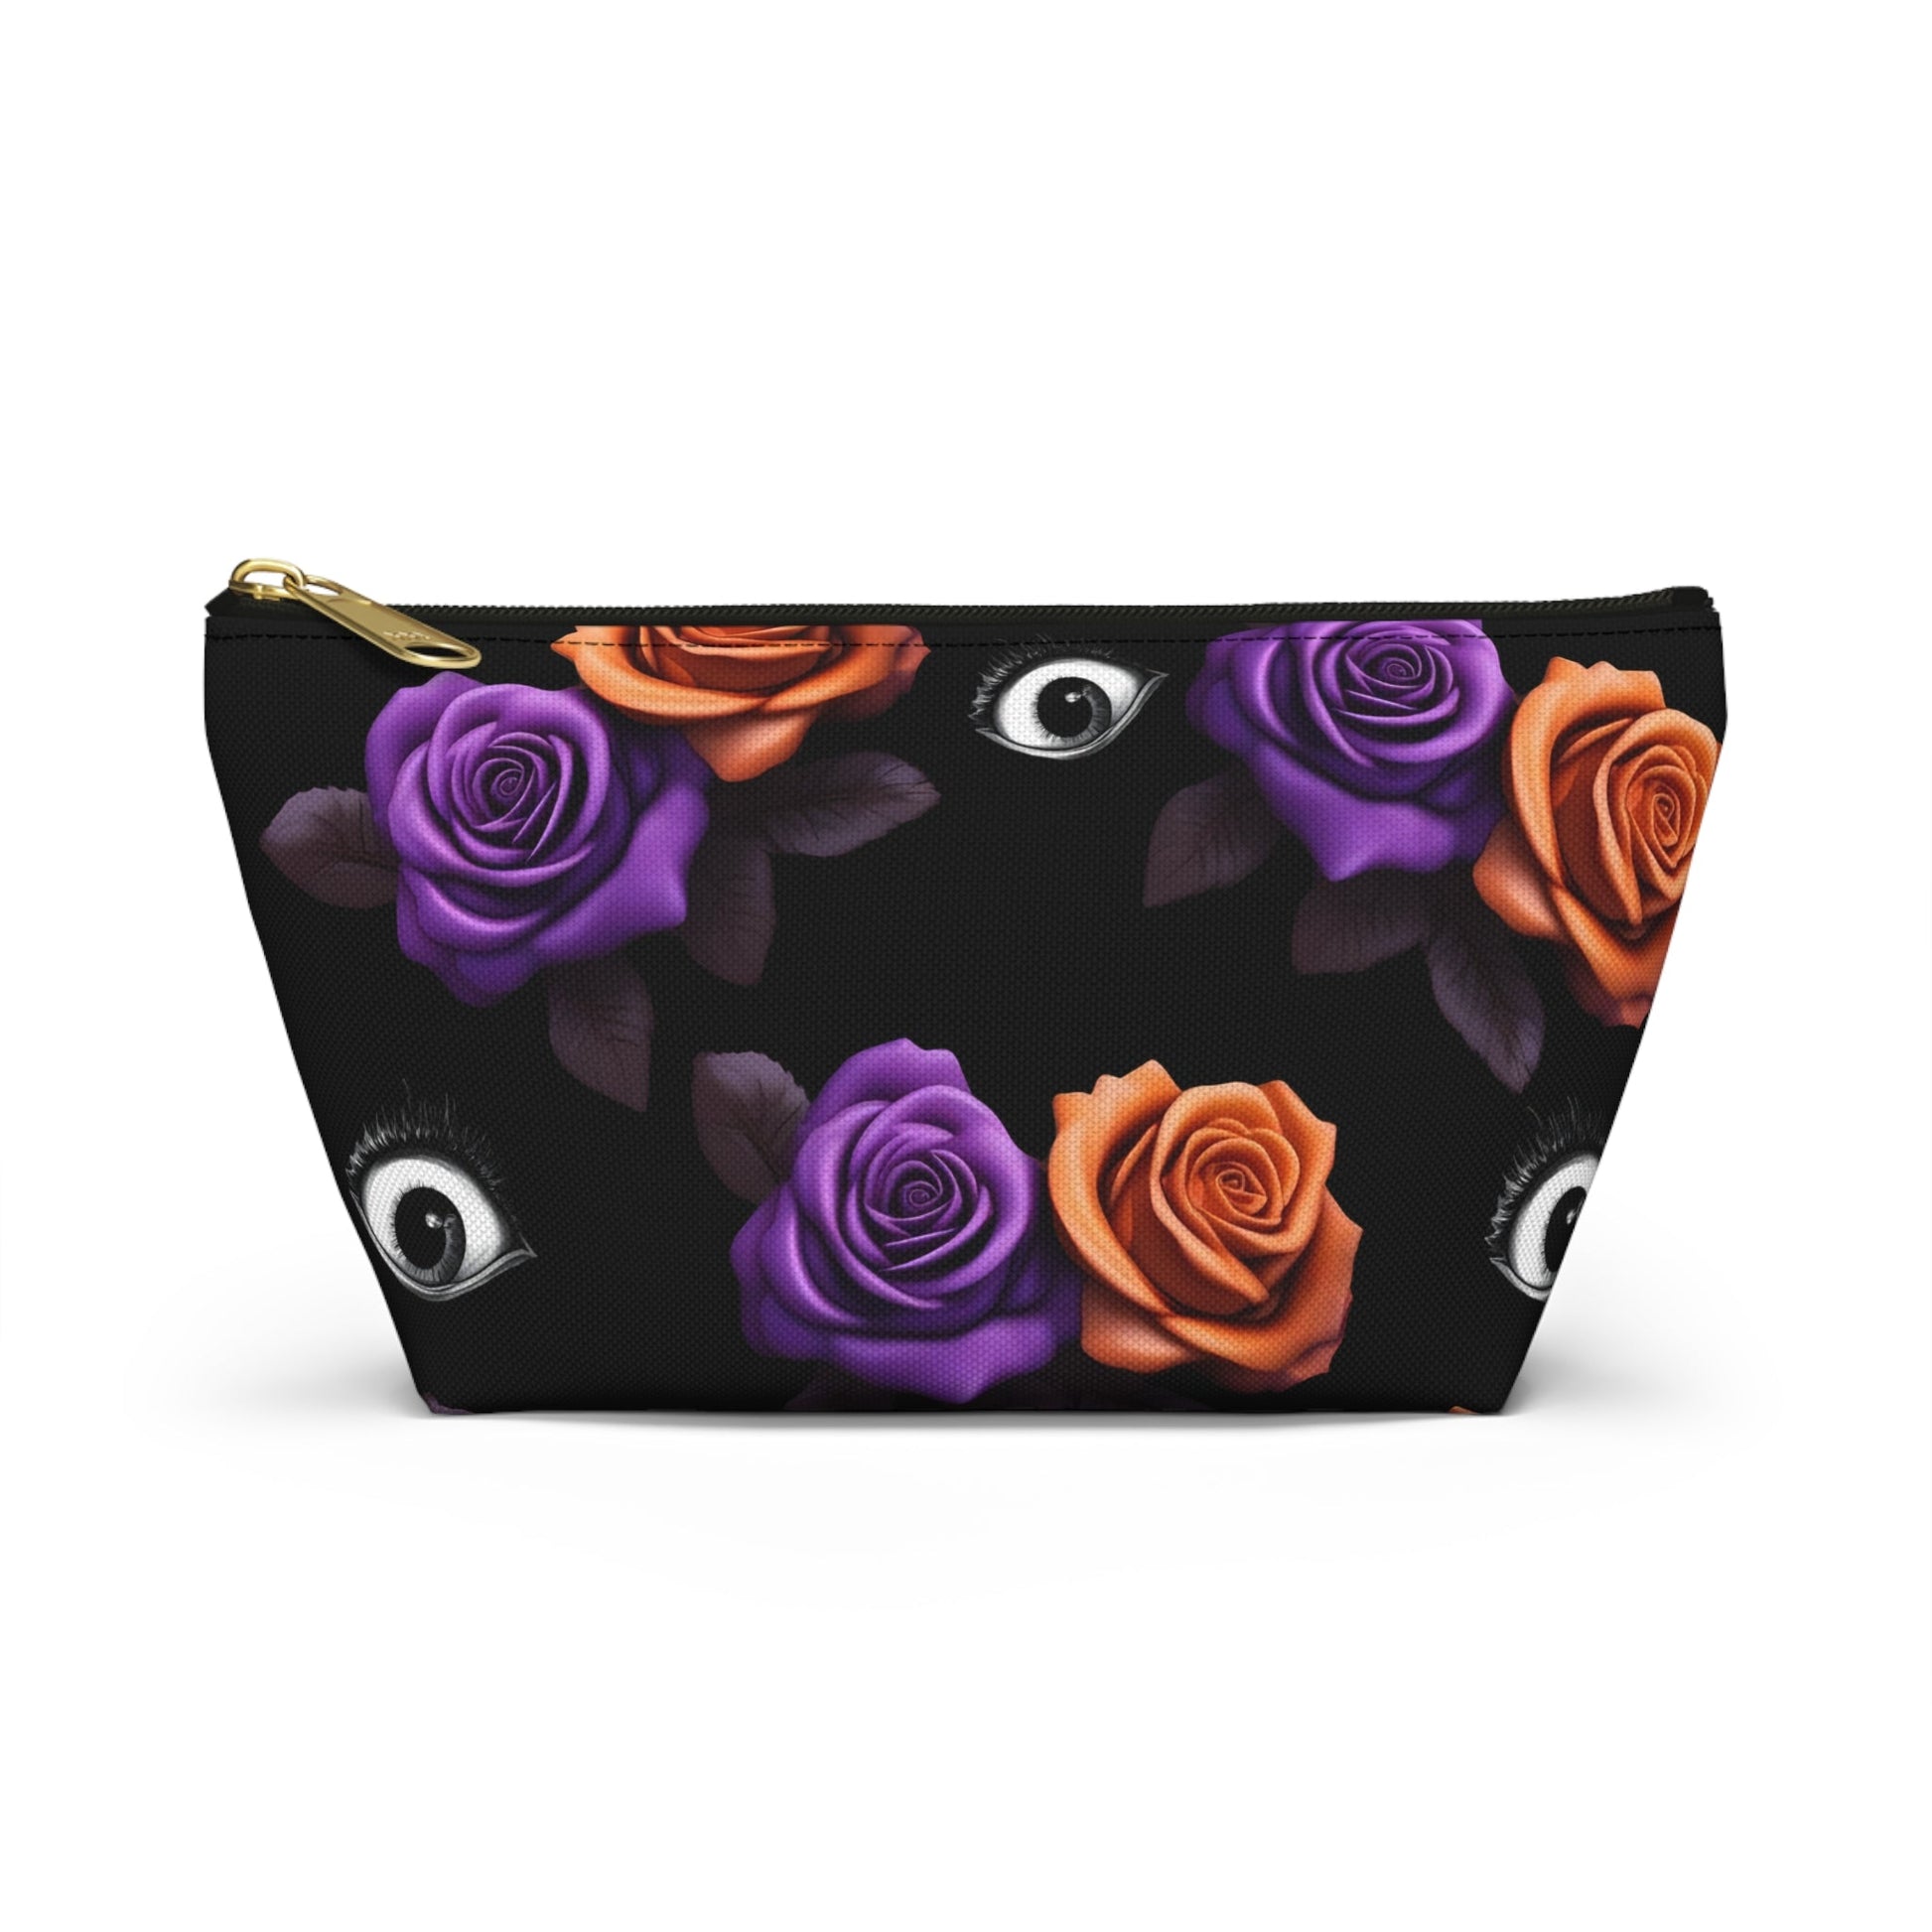 Orange and Purple Roses With Eyeballs Accessory Pouch Cosmetic BagBagsVTZdesignsSmallBlack zipperAccessoriesAll Over PrintAssembled in the USA